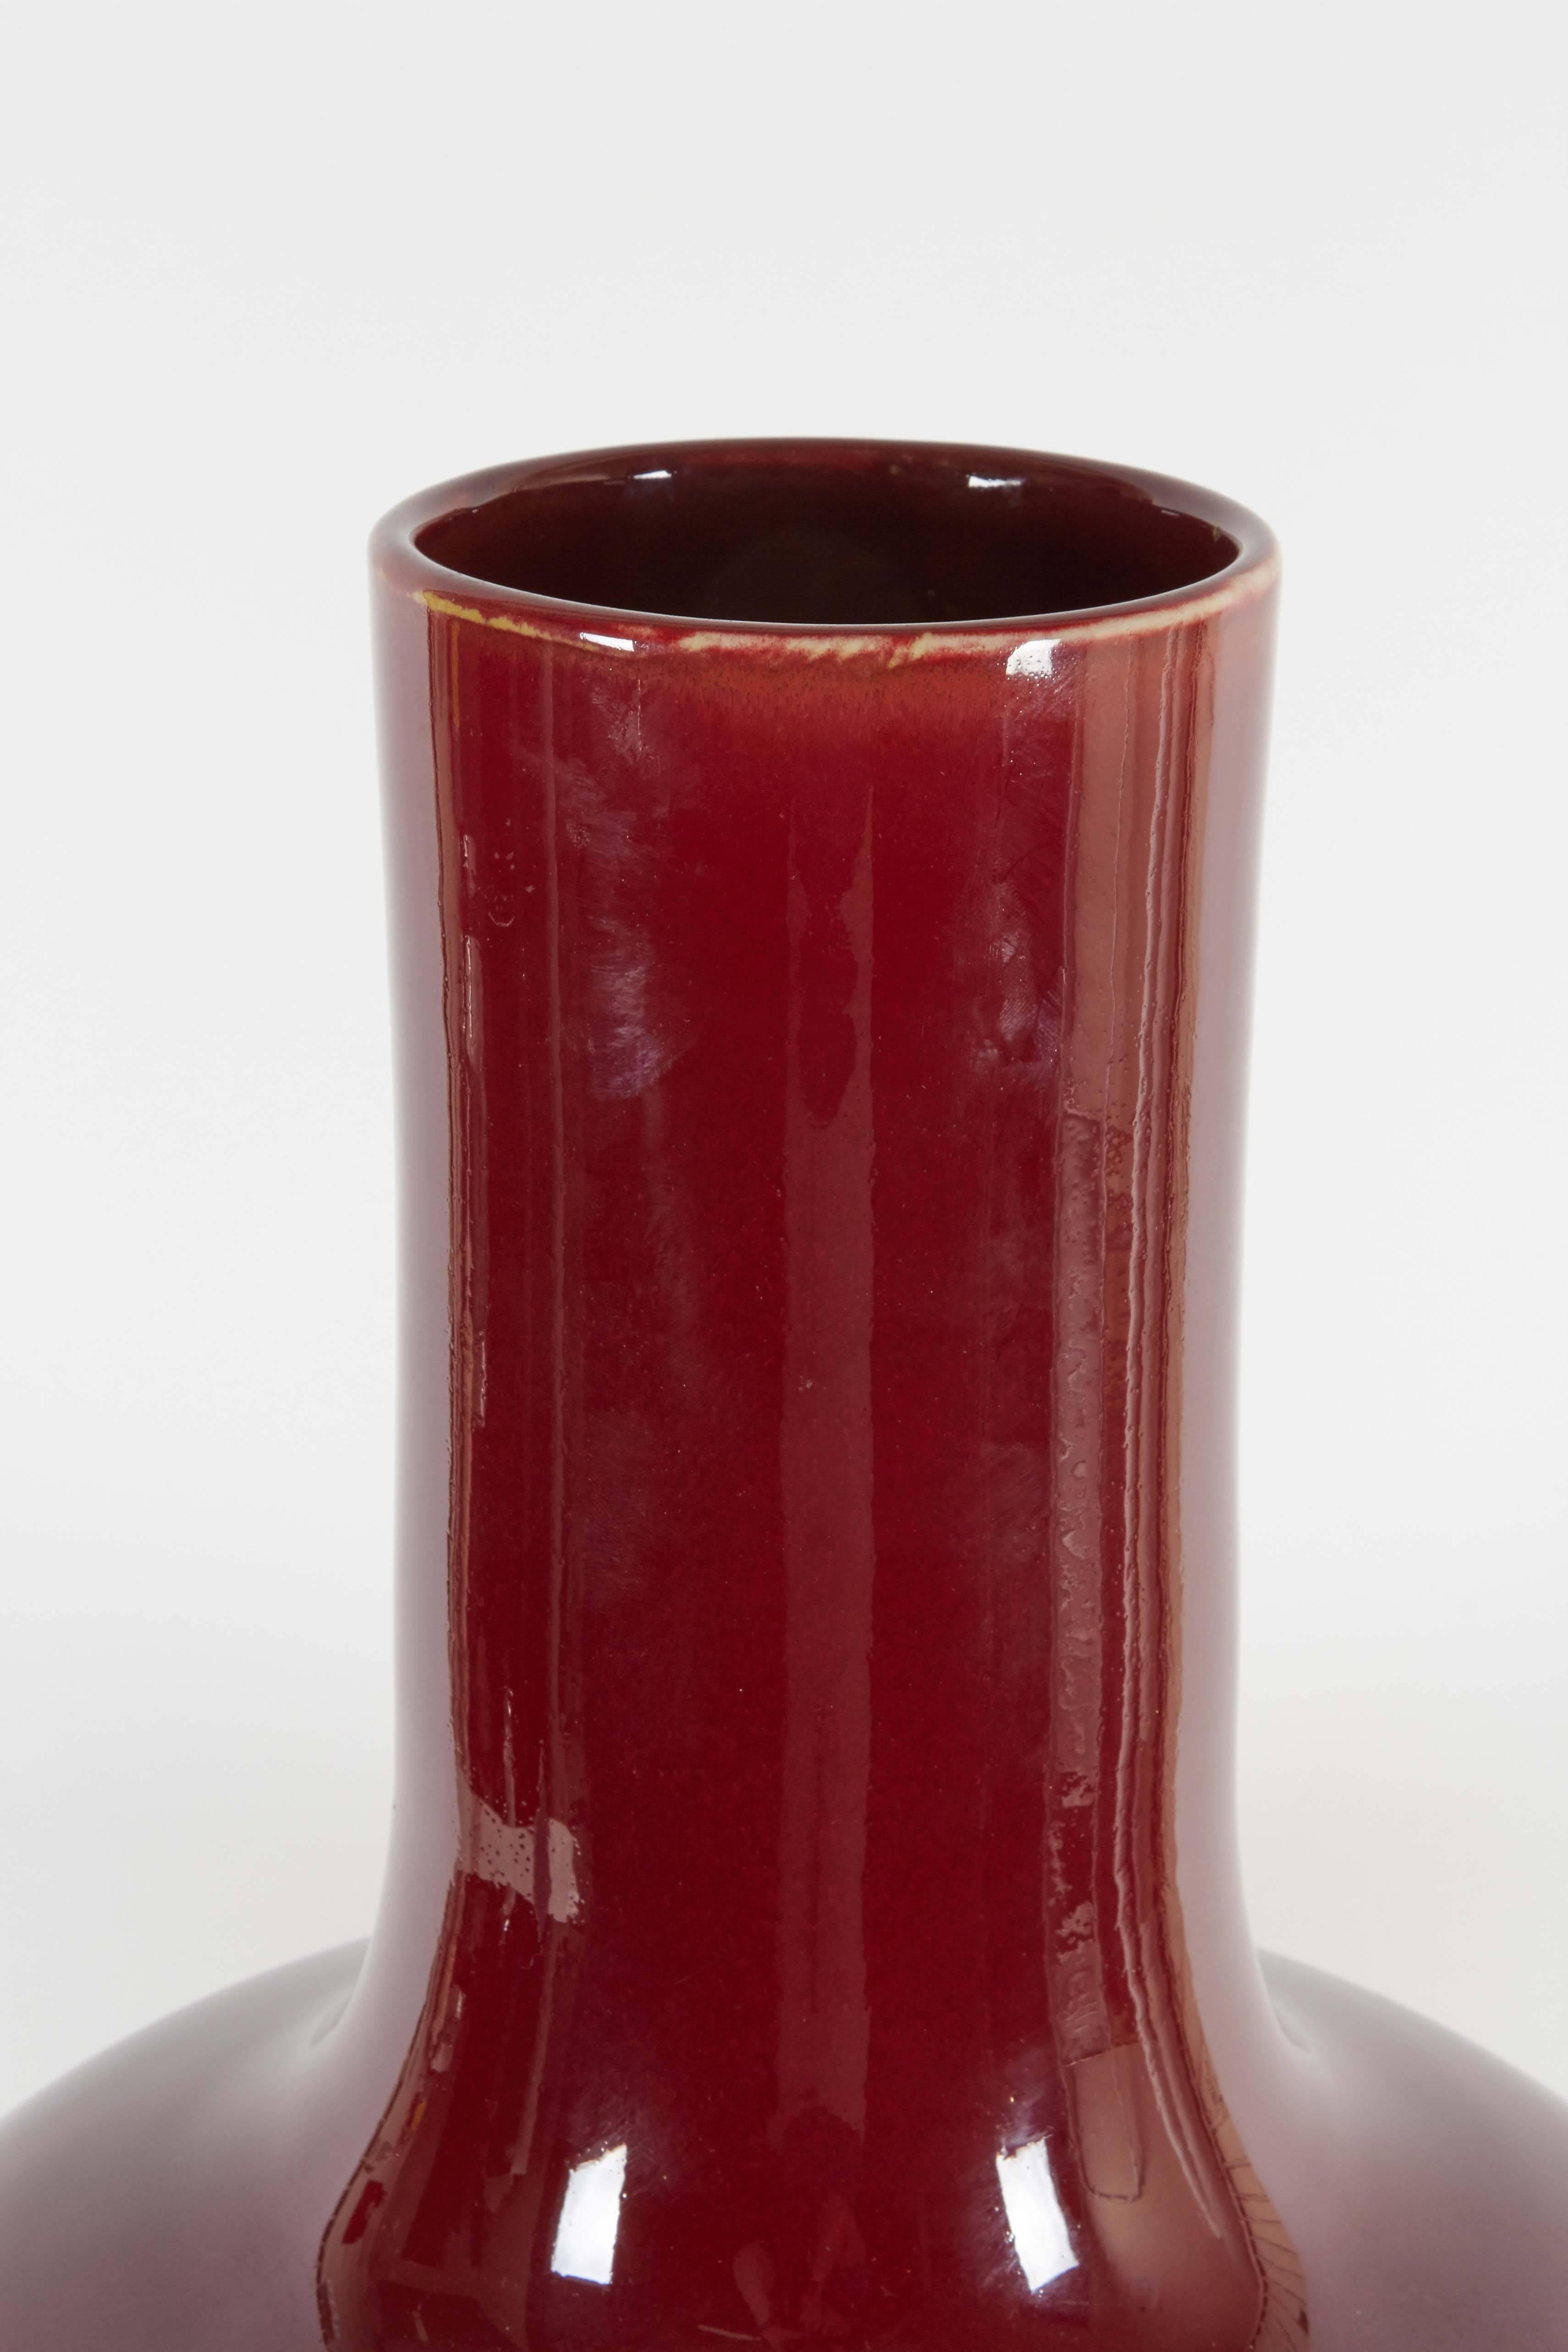 A Chinese ceramic vase, produced circa 1930s-1940s, flame glazed in deep red. Includes marks to base. This piece remains in very fine condition, wear to base consistent with age.

10434